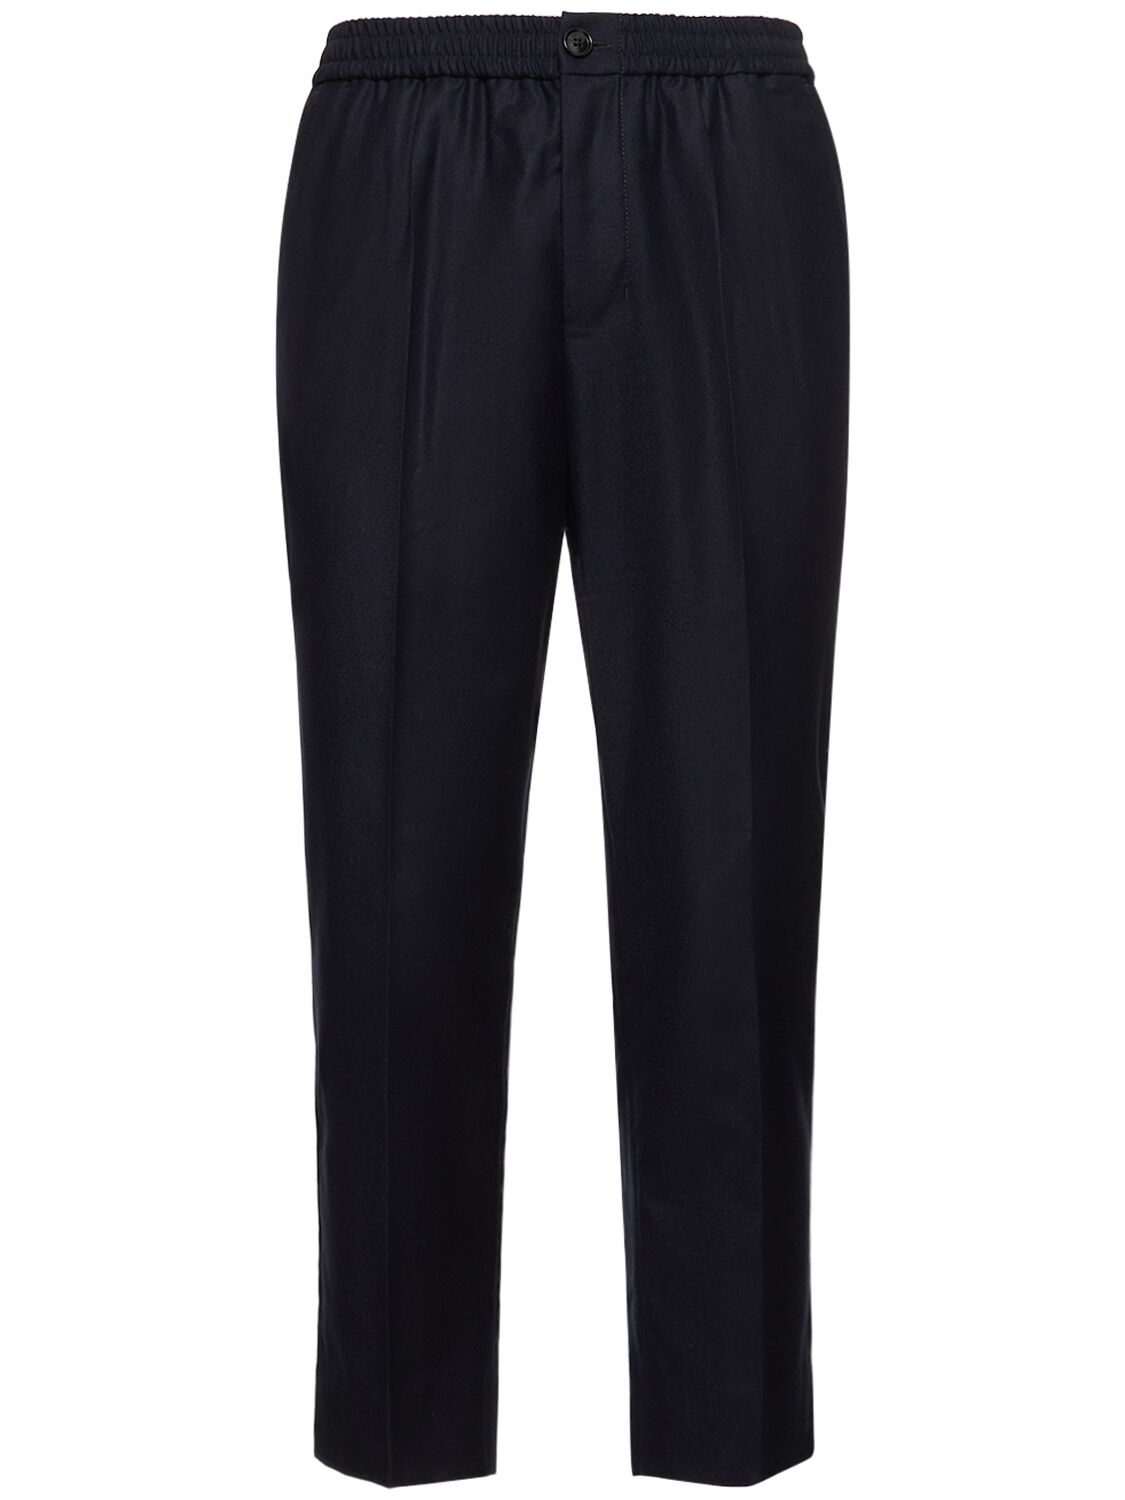 Ami Alexandre Mattiussi Wool Blend Cropped Pants In Midnight Blue